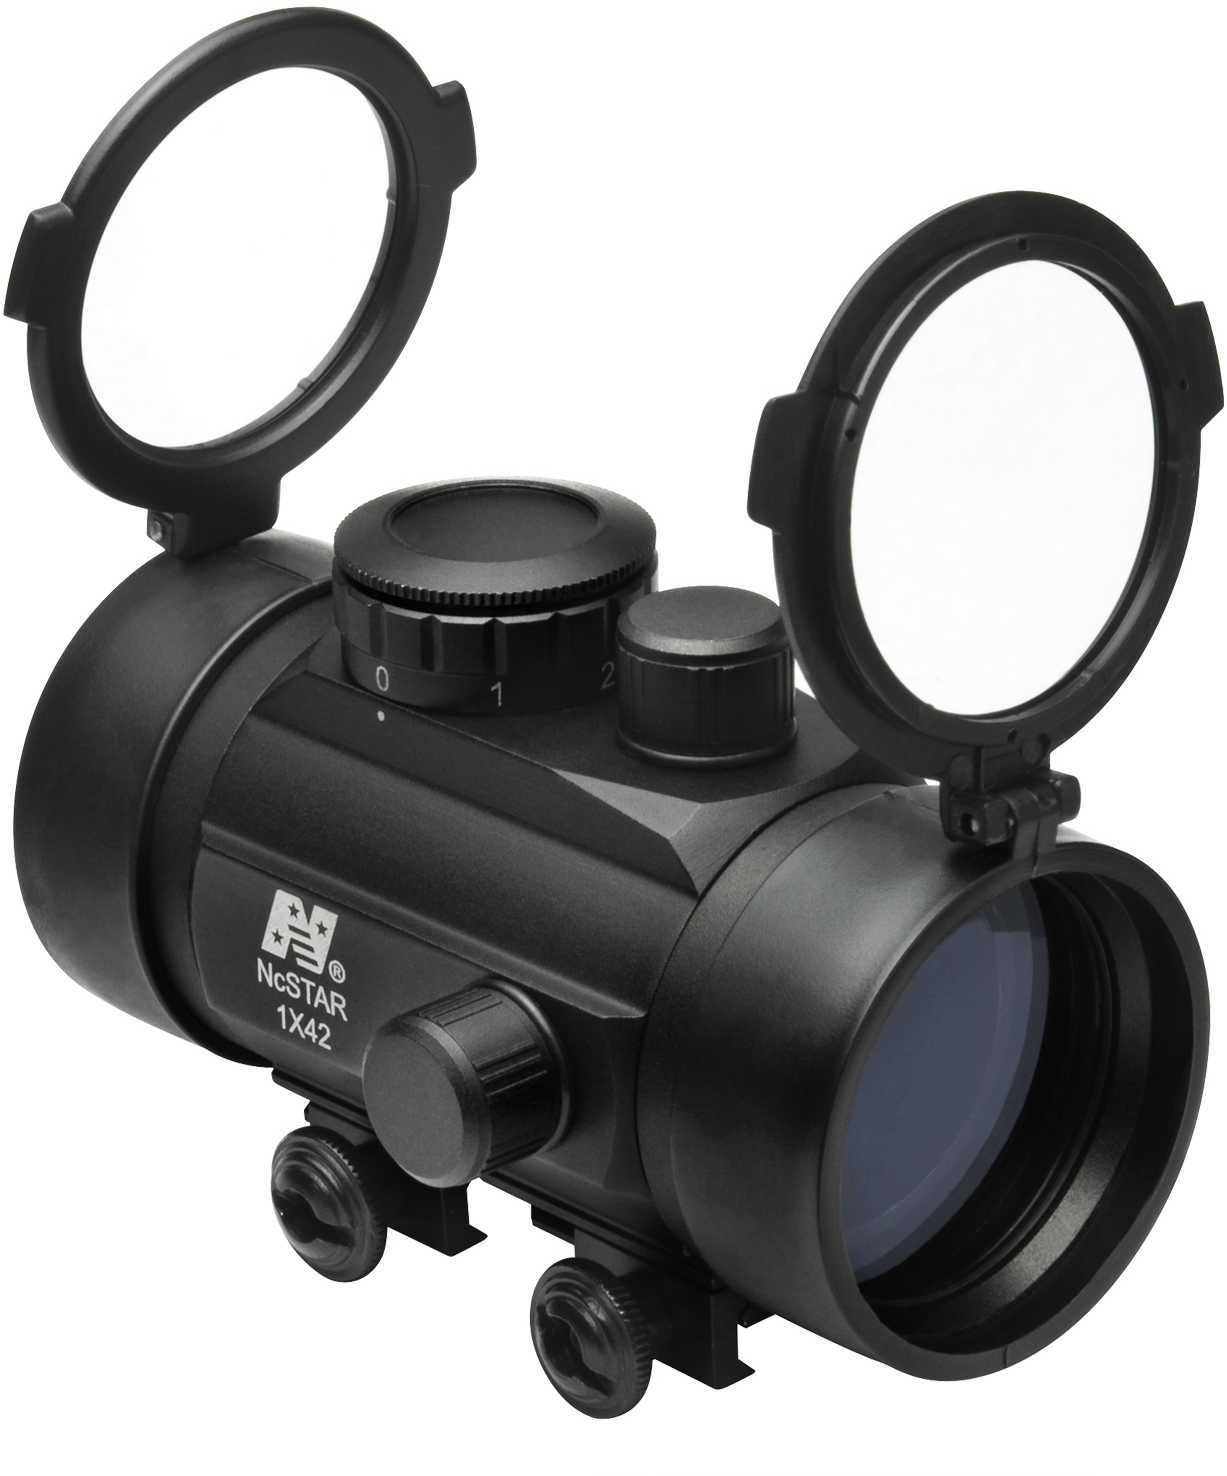 NcStar B-Style Red Dot Sight 1x42 with Base DBB142